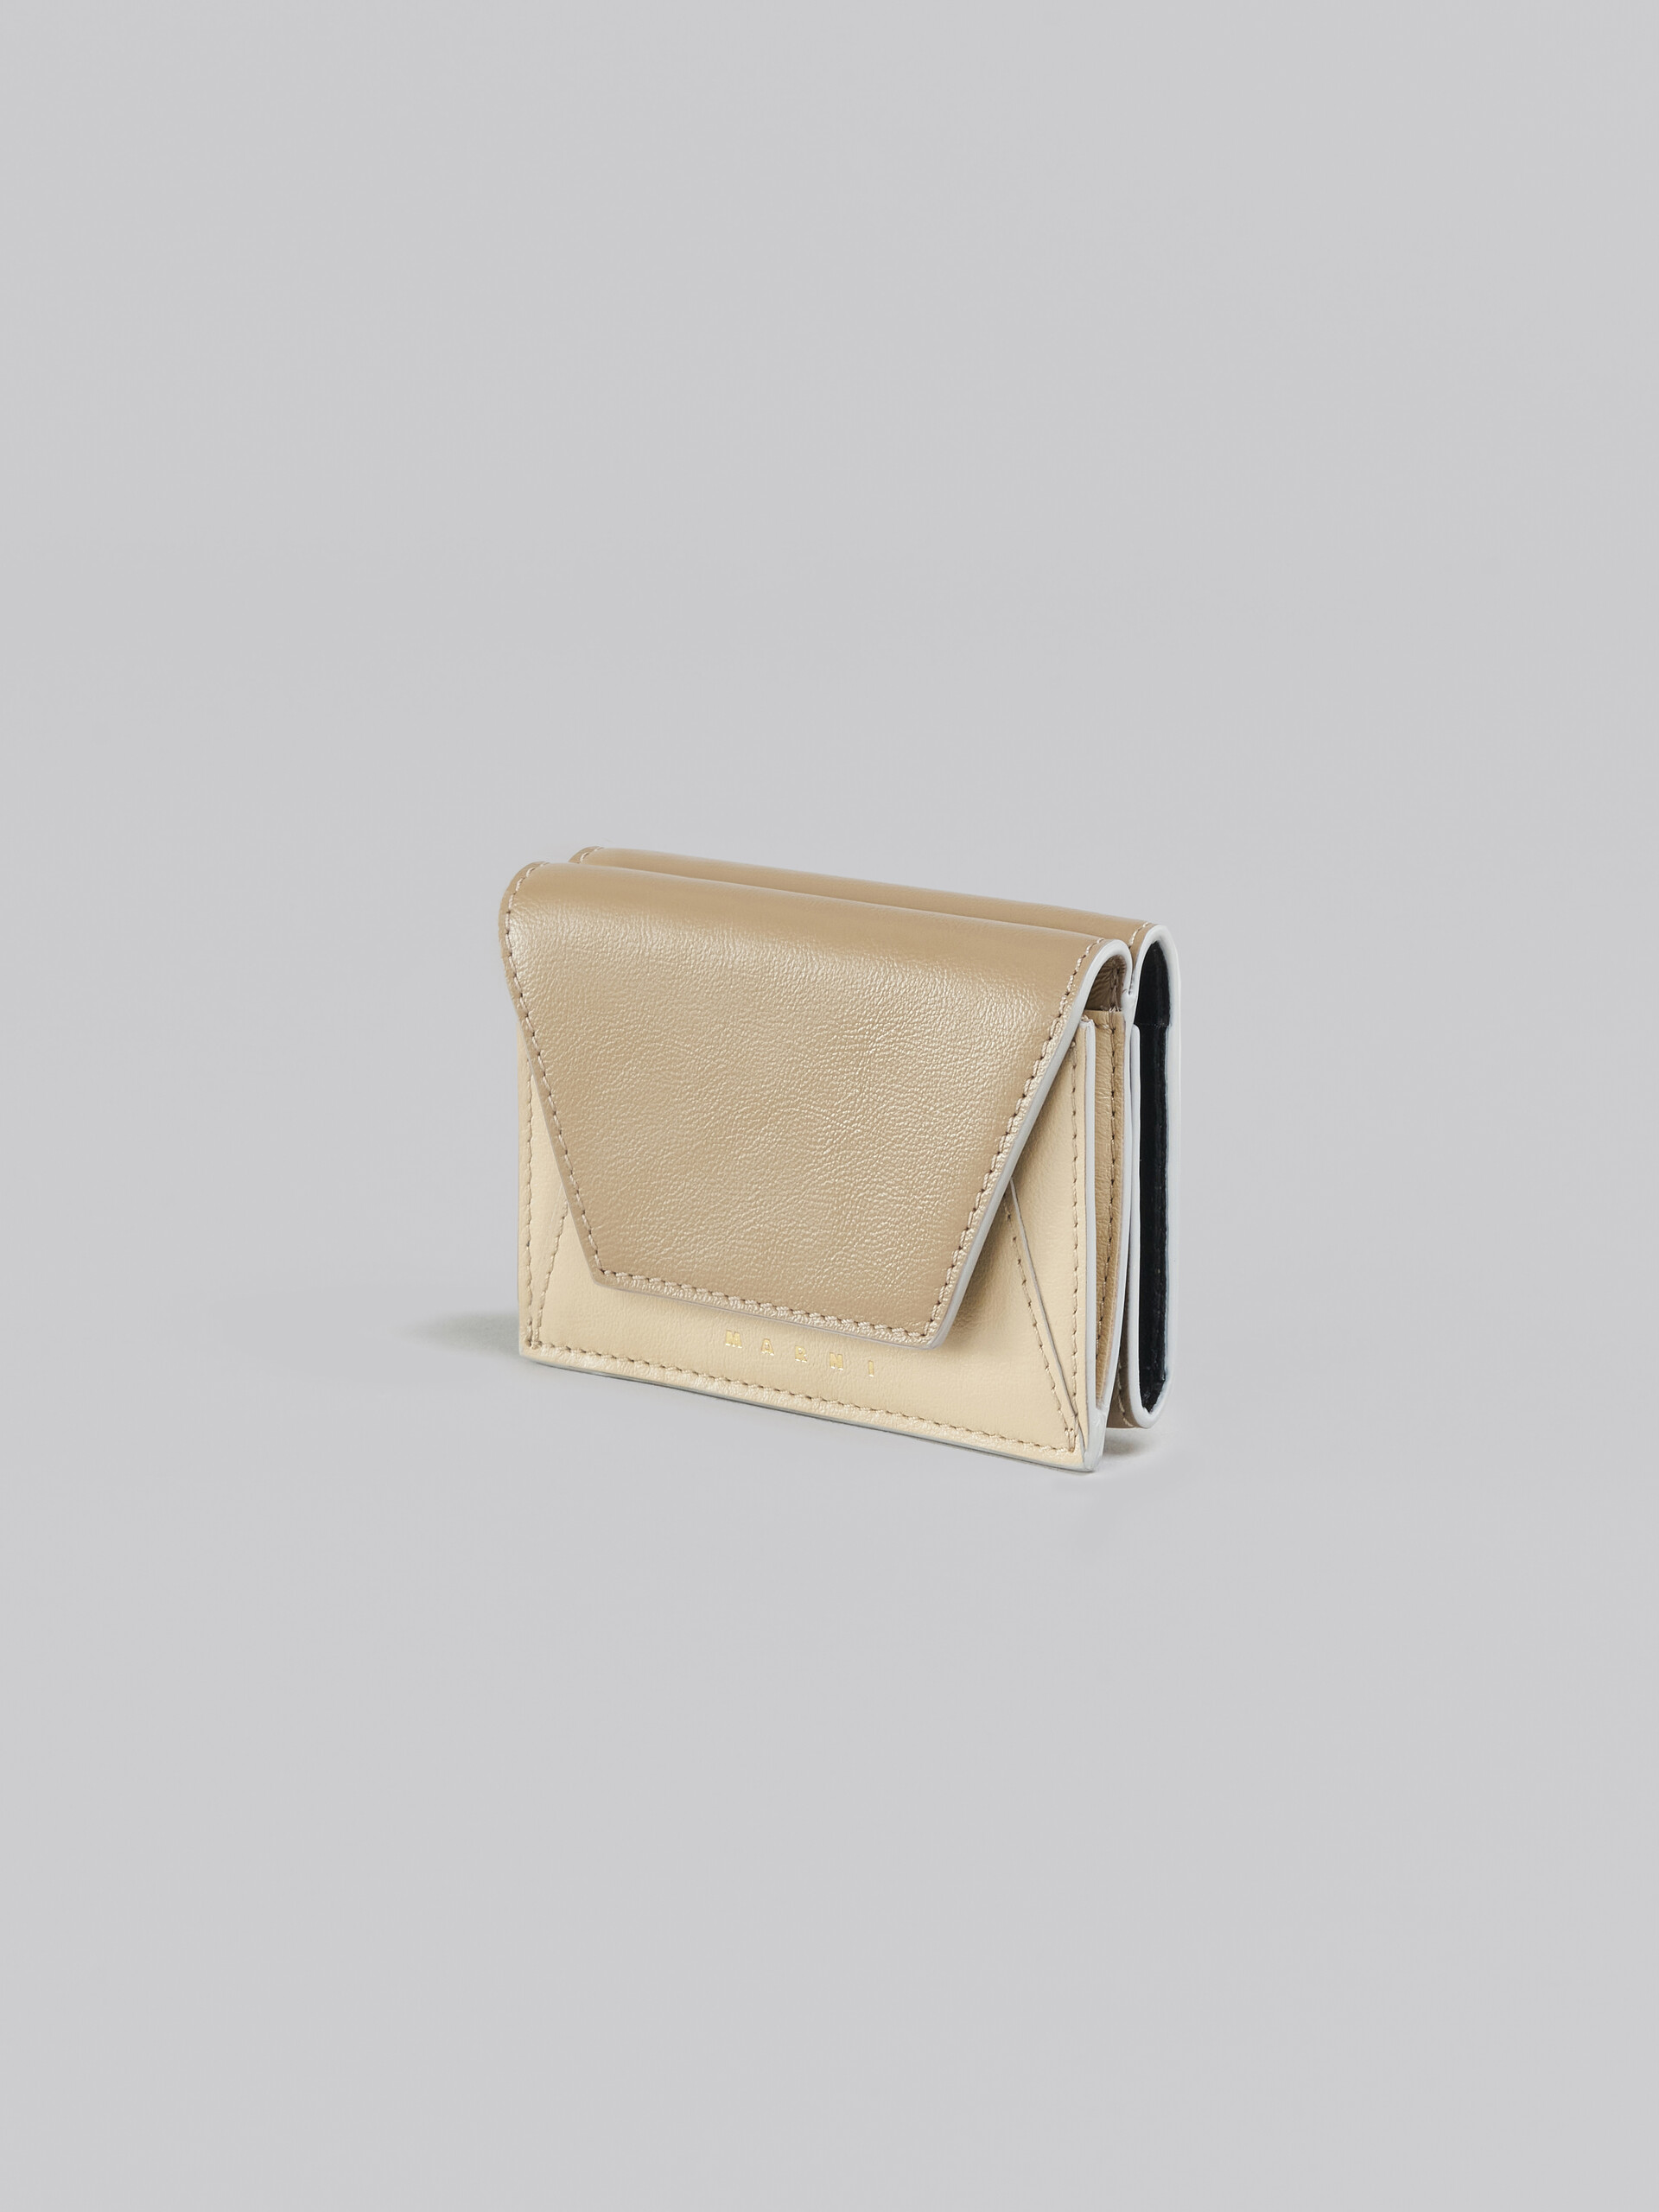 Grey-green and beige leather tri-fold wallet - Wallets - Image 4